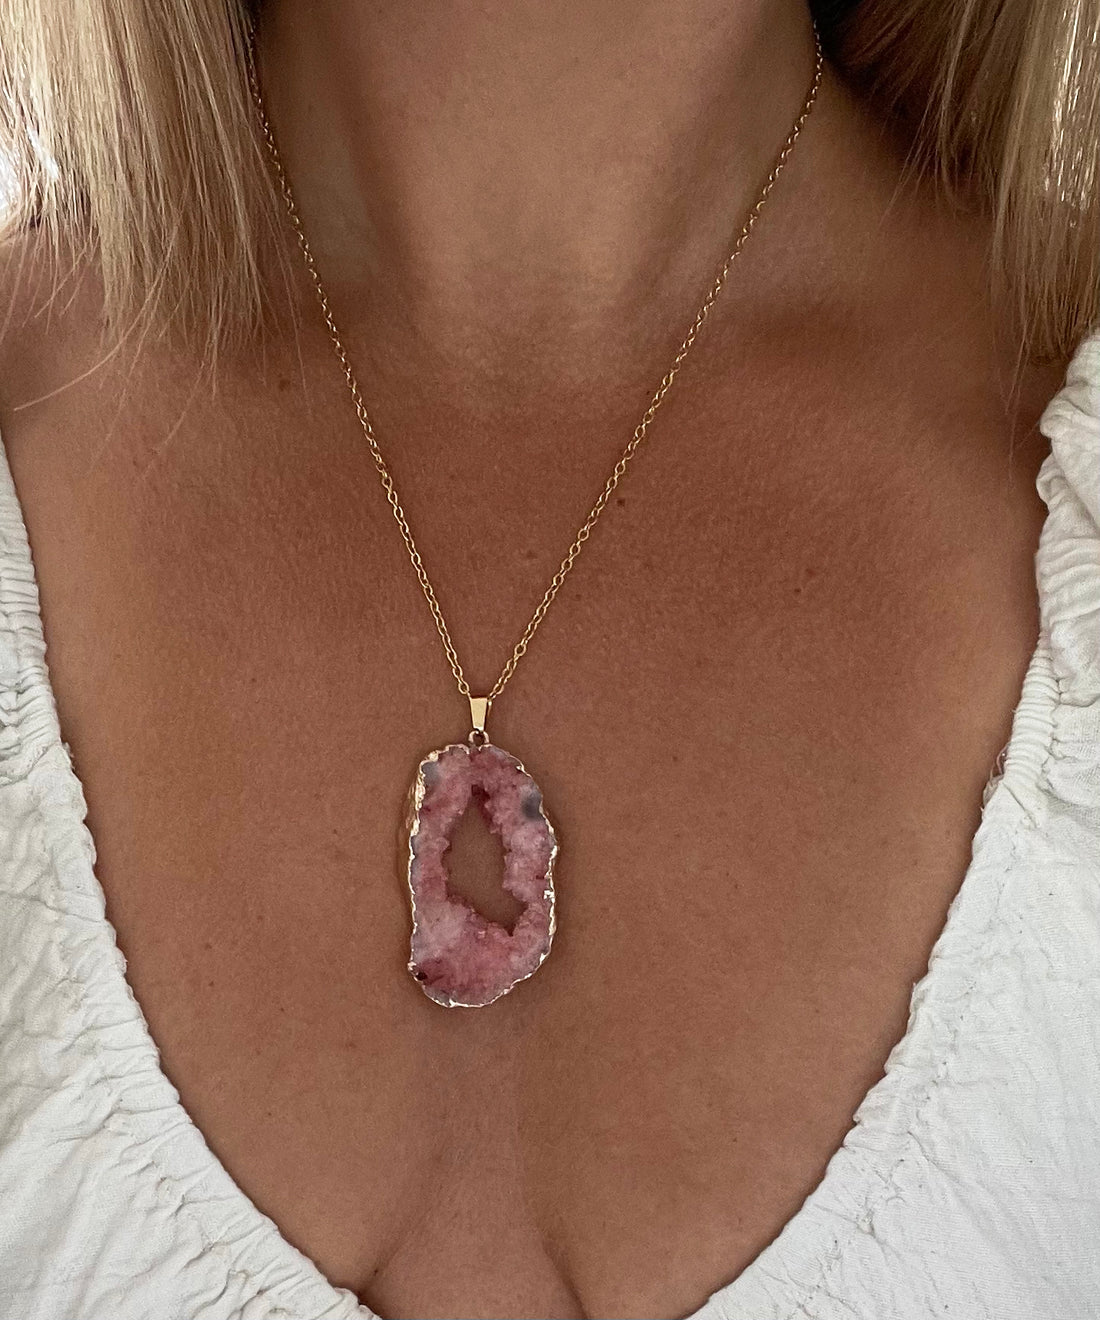 Metal chain healing energy necklace for women Dyed Natural crystal druzy  crystal Minerals gem stone pendant charm necklace - Walmart.com